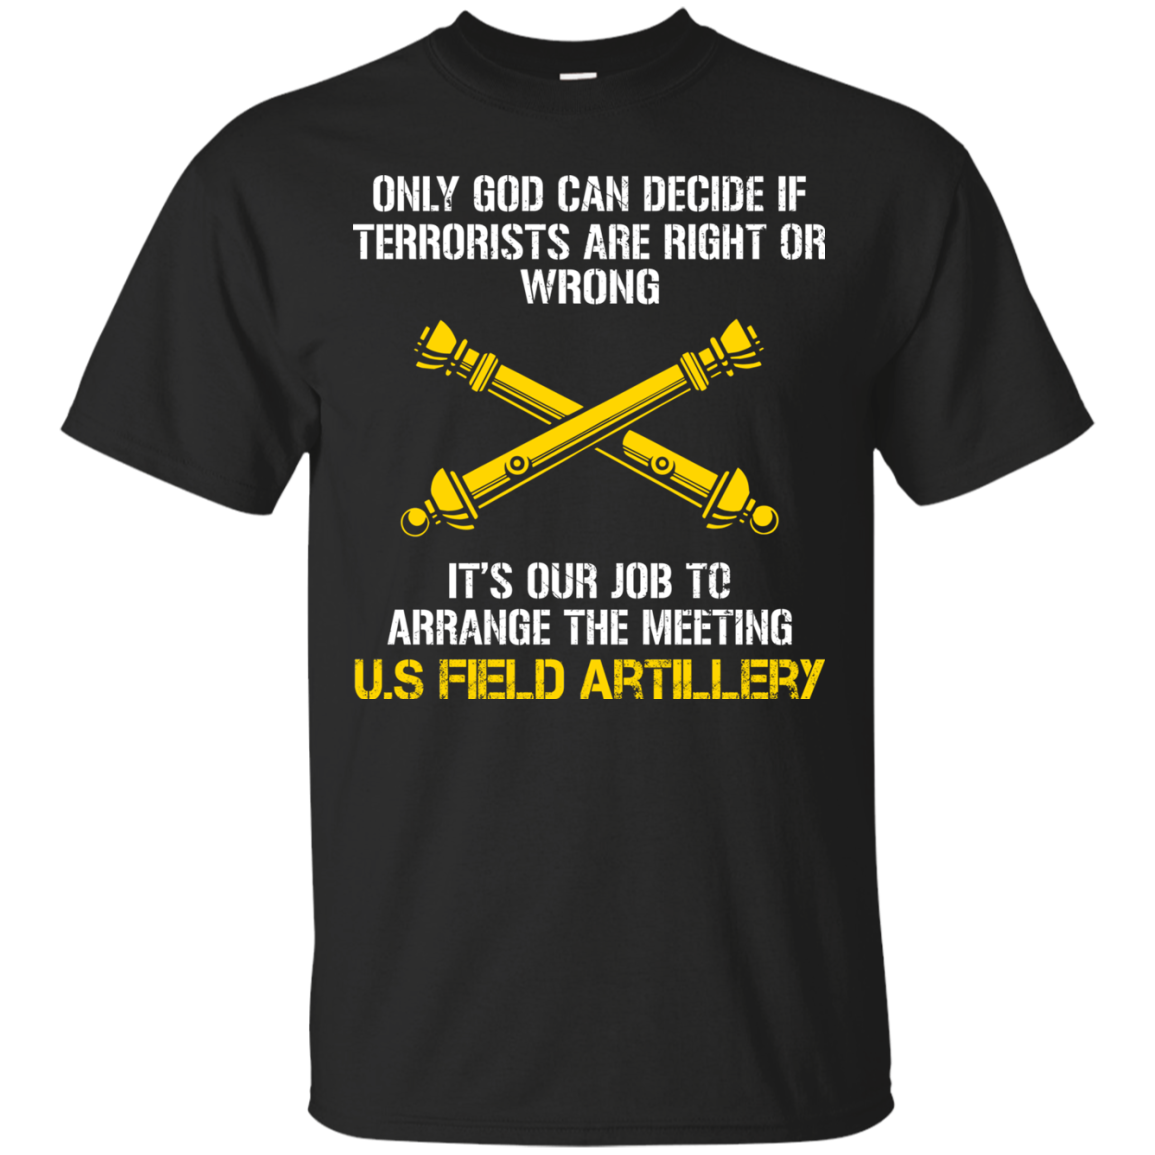 US Field Artillery Shirts It's Our Job To Arrange The Meeting - Teesmiley